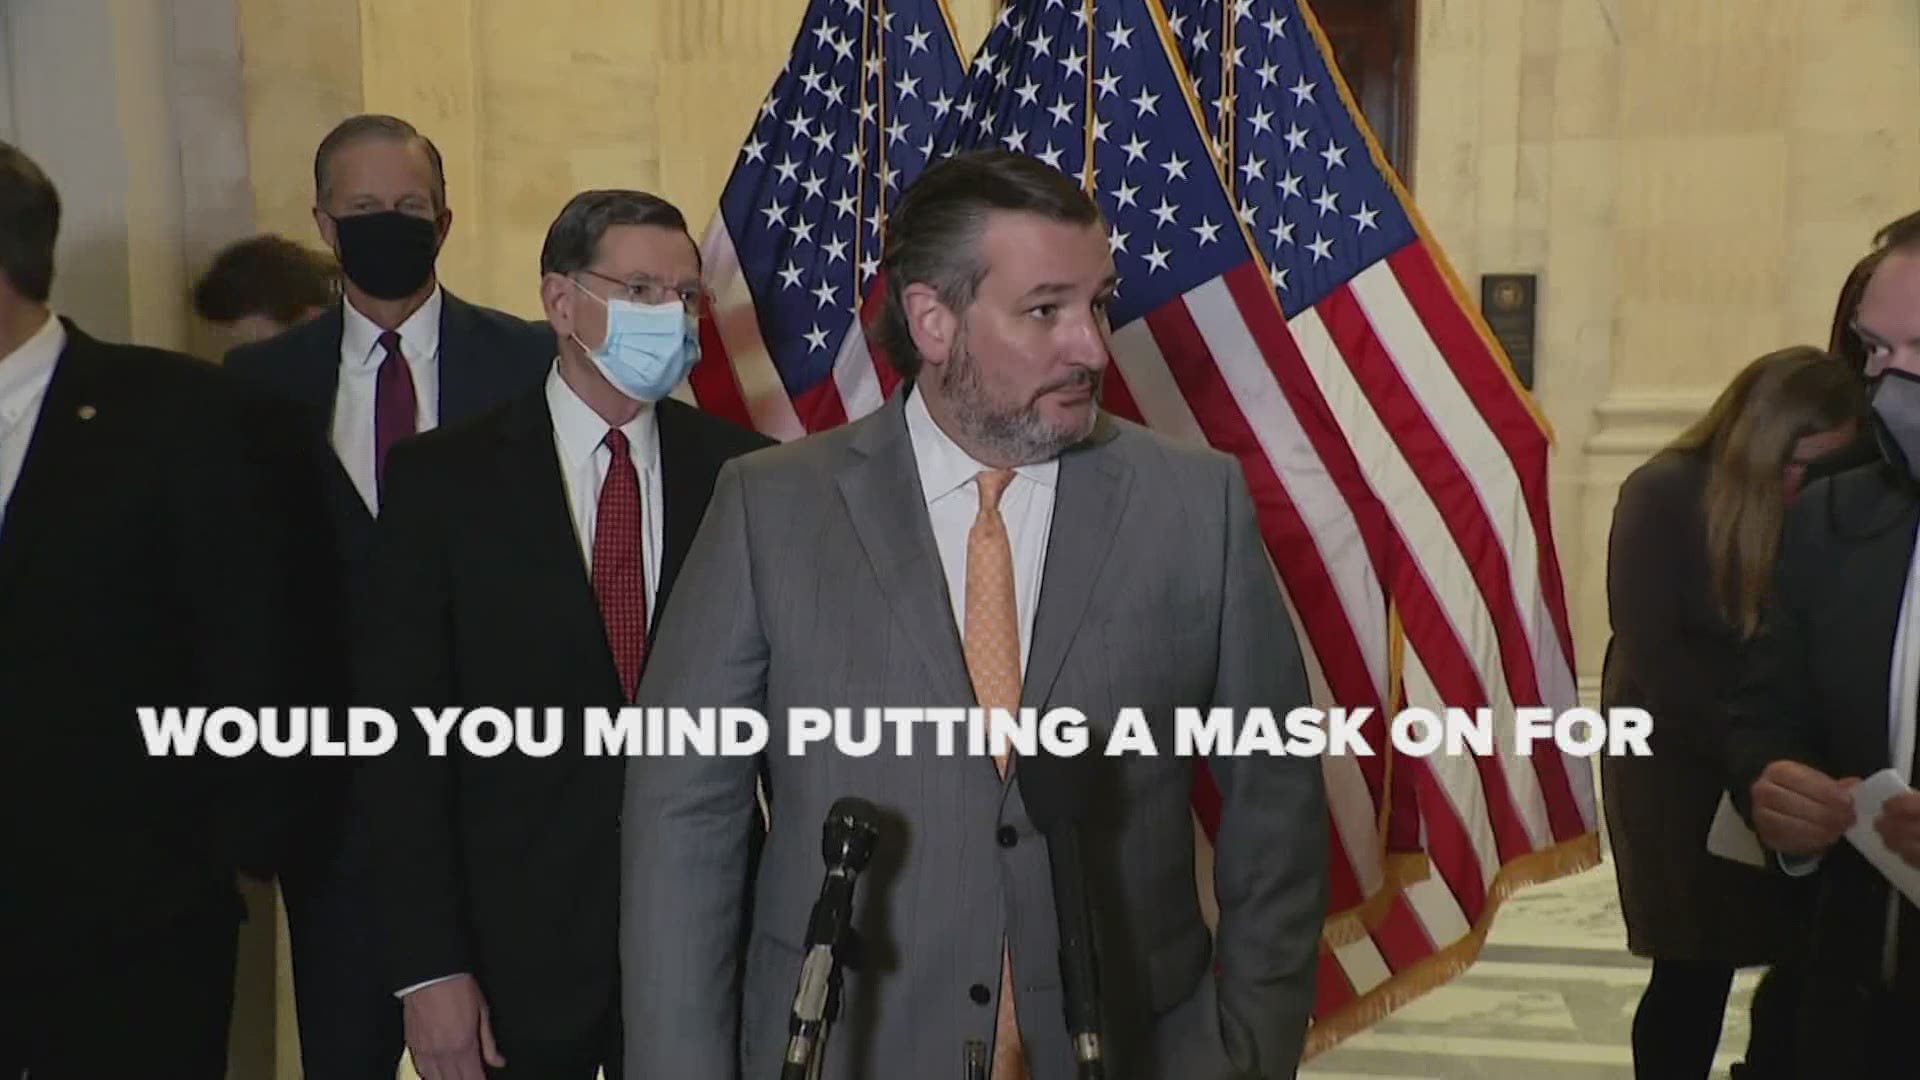 Sen. Ted Cruz said he didn't have to wear a mask since he's been vaccinated, but that's not what the CDC says.